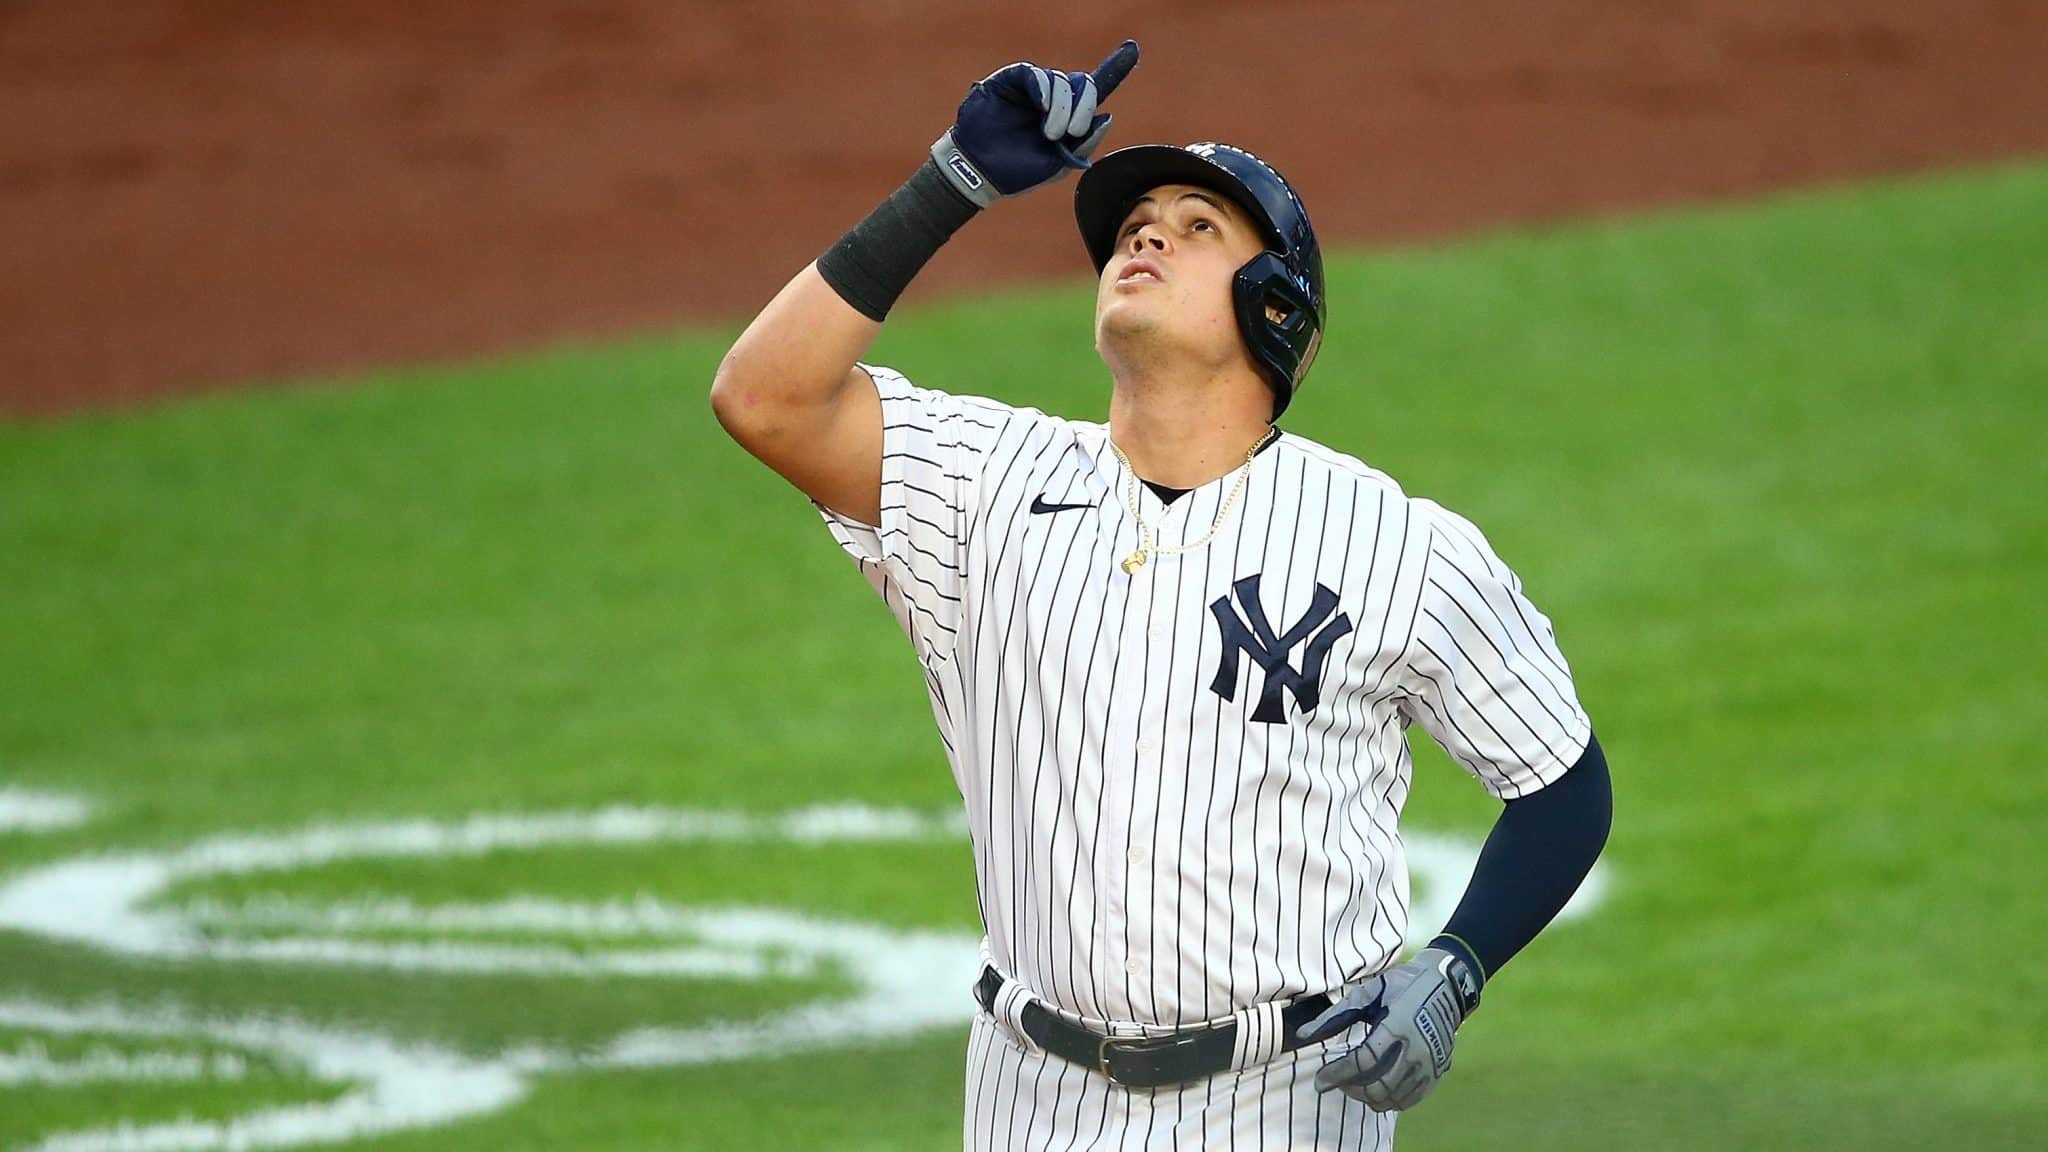 NEW YORK, NEW YORK - AUGUST 15: Gio Urshela #29 of the New York Yankees celebrates after hitting a 2-run home run in the first inning against the Boston Red Sox at Yankee Stadium on August 15, 2020 in New York City.